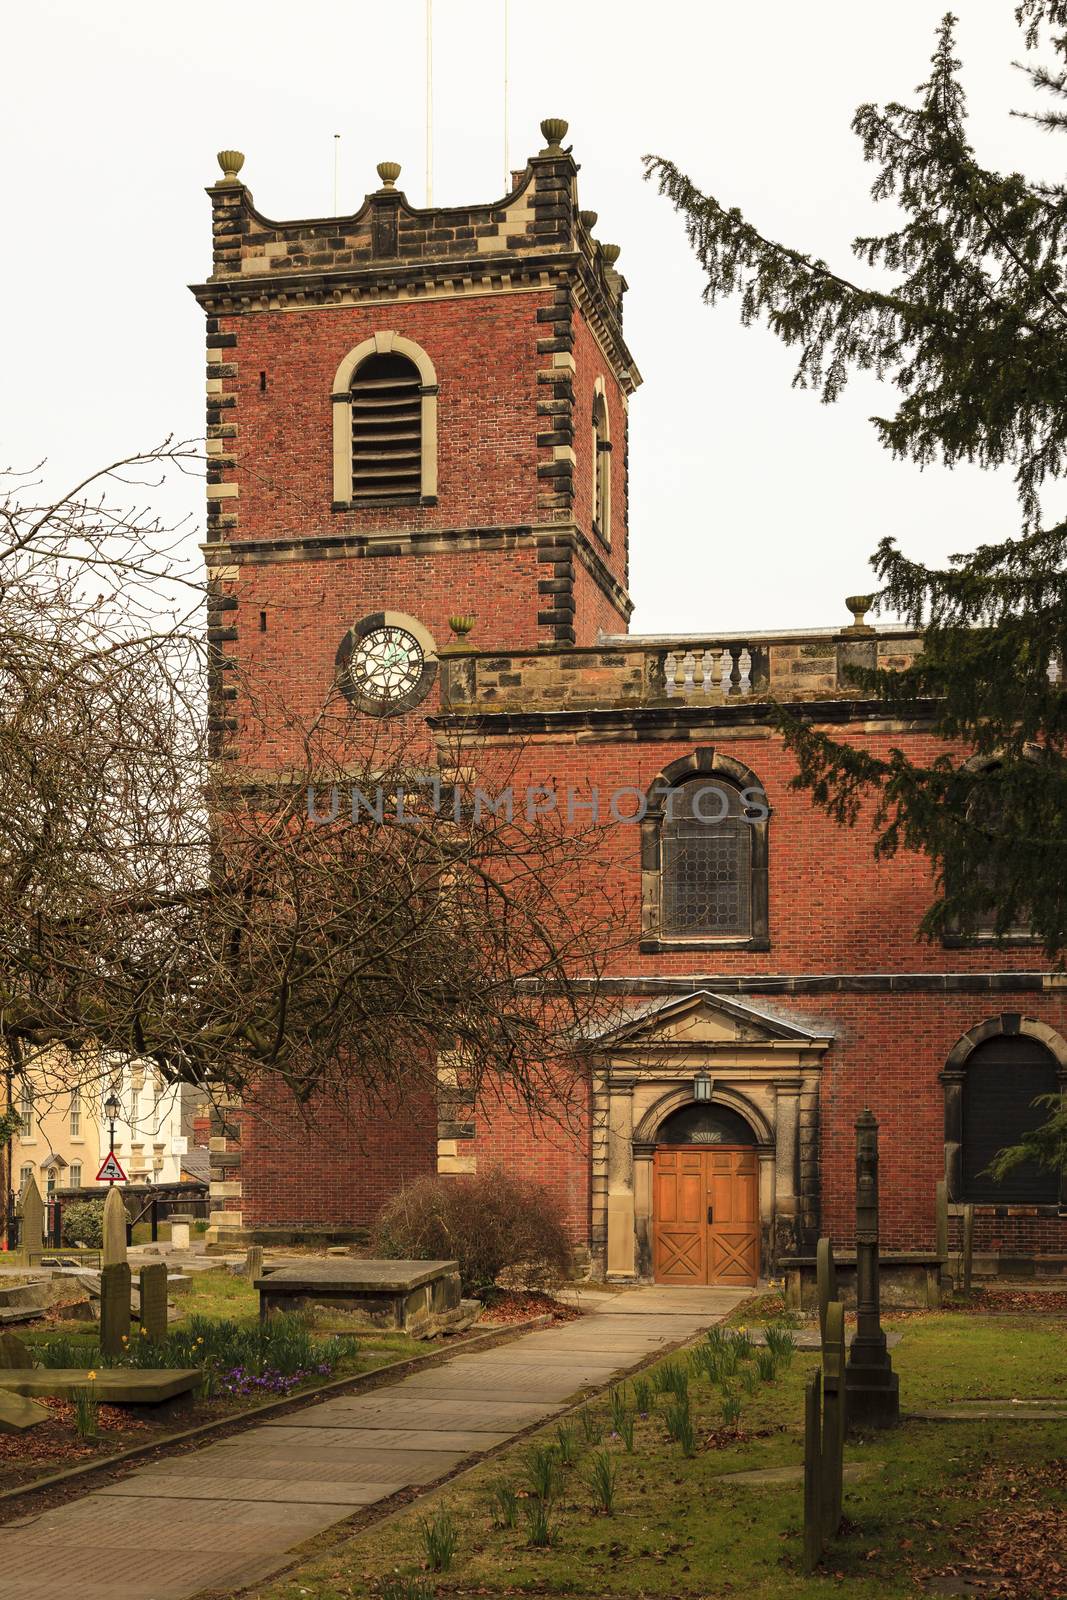 St John the Baptist is an Anglican church situated in Knutsford, Cheshire in northern England.  It was built in a neoclassical style and completed in 1744.